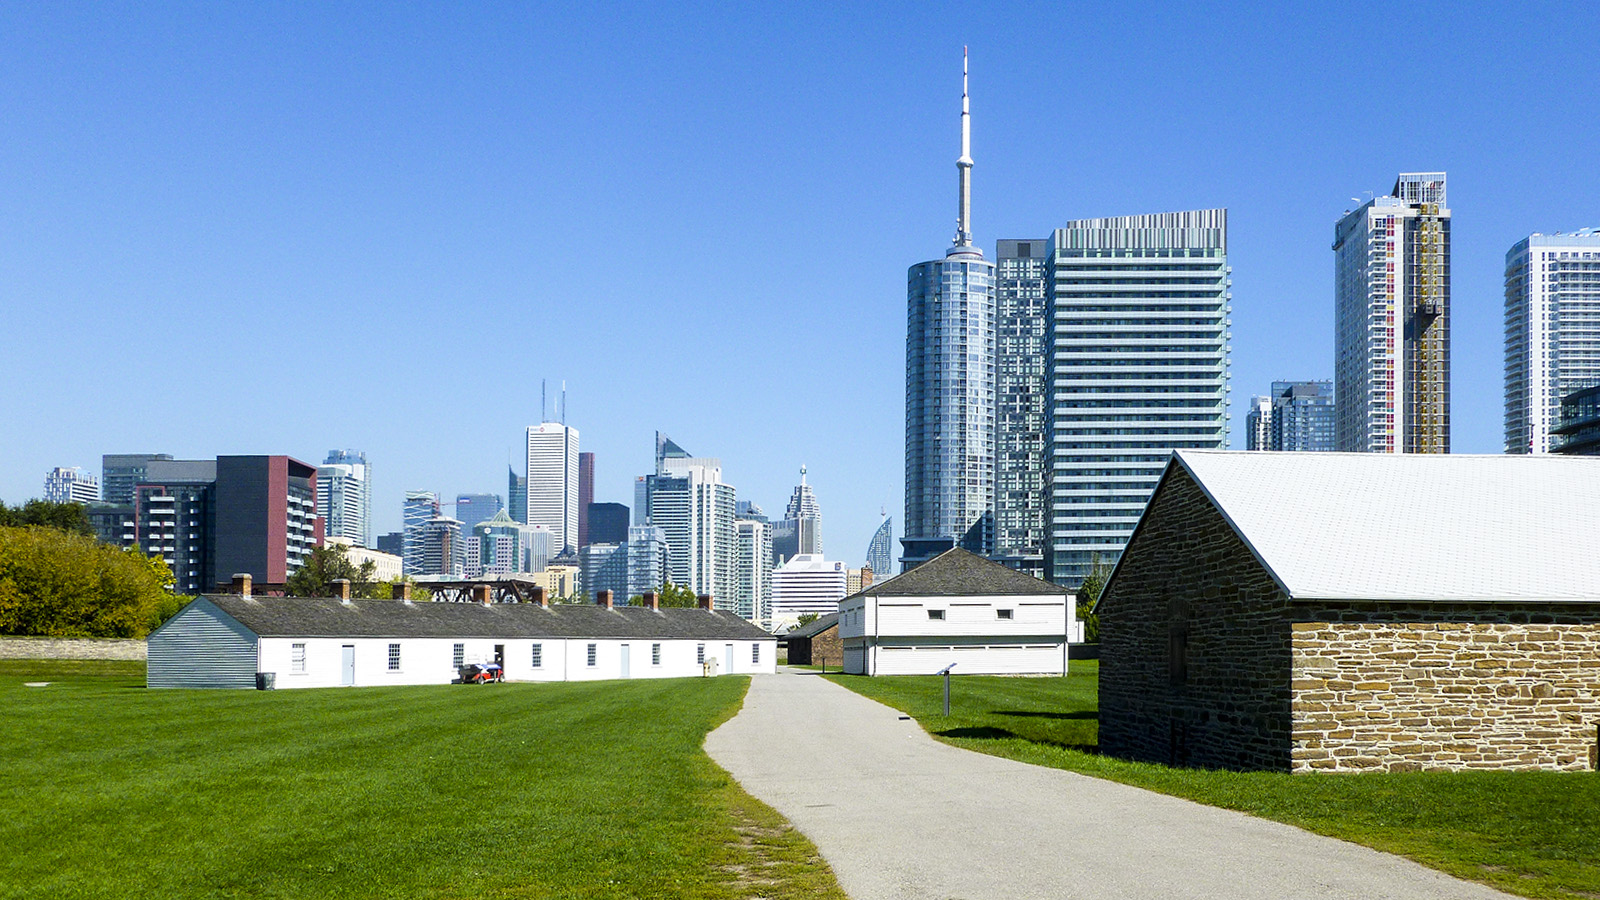 Fort York National Historic Site Images